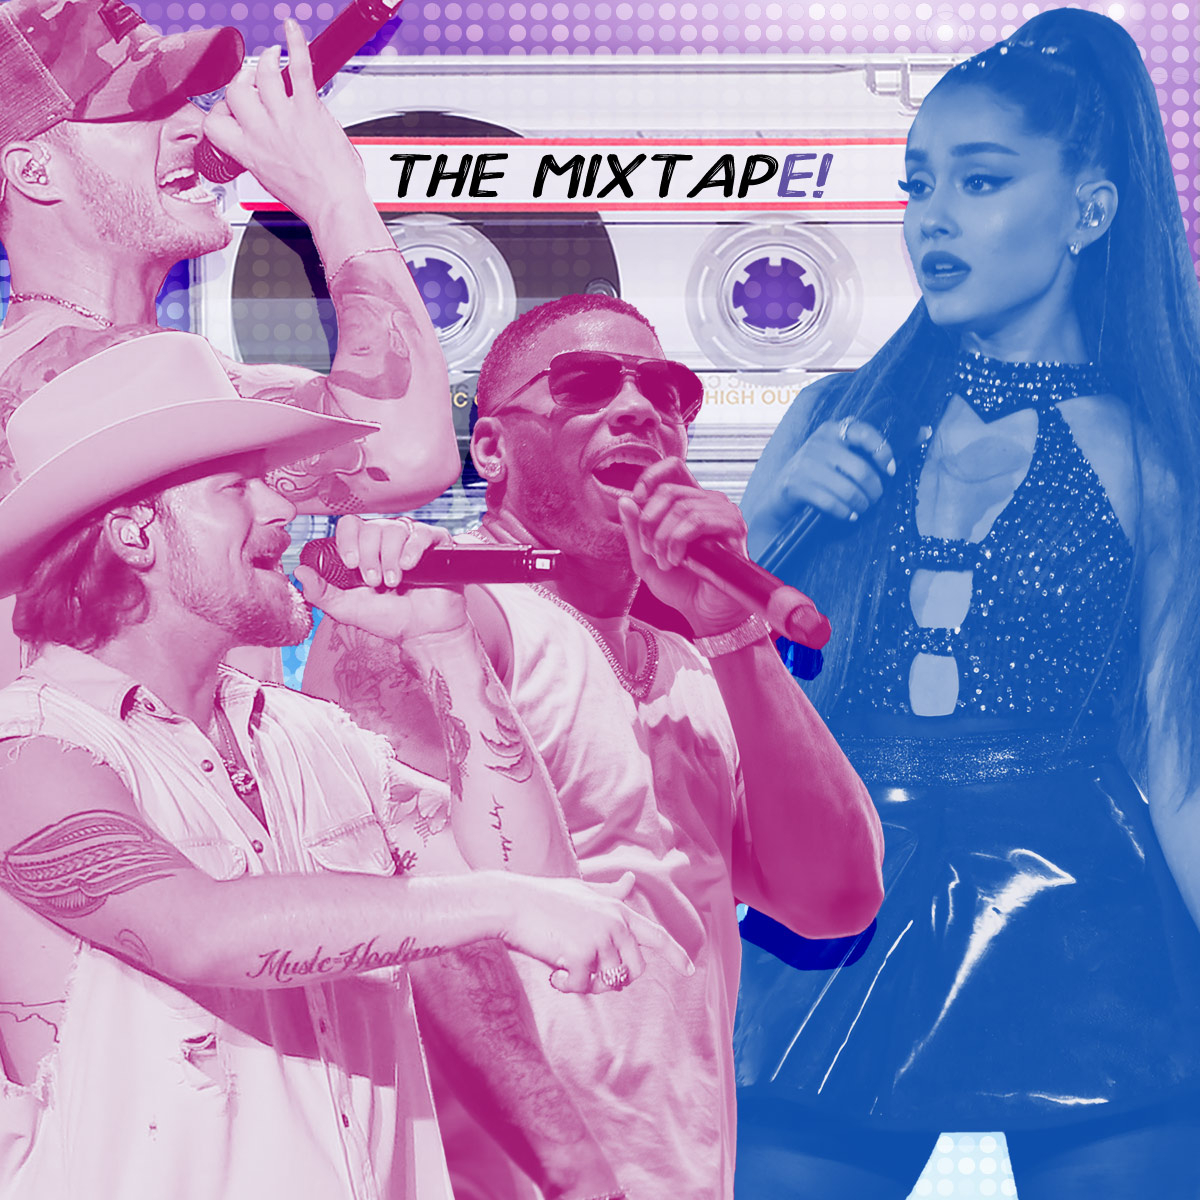 The MixtapE! Presents Ariana Grande, Nelly, FGL and More New